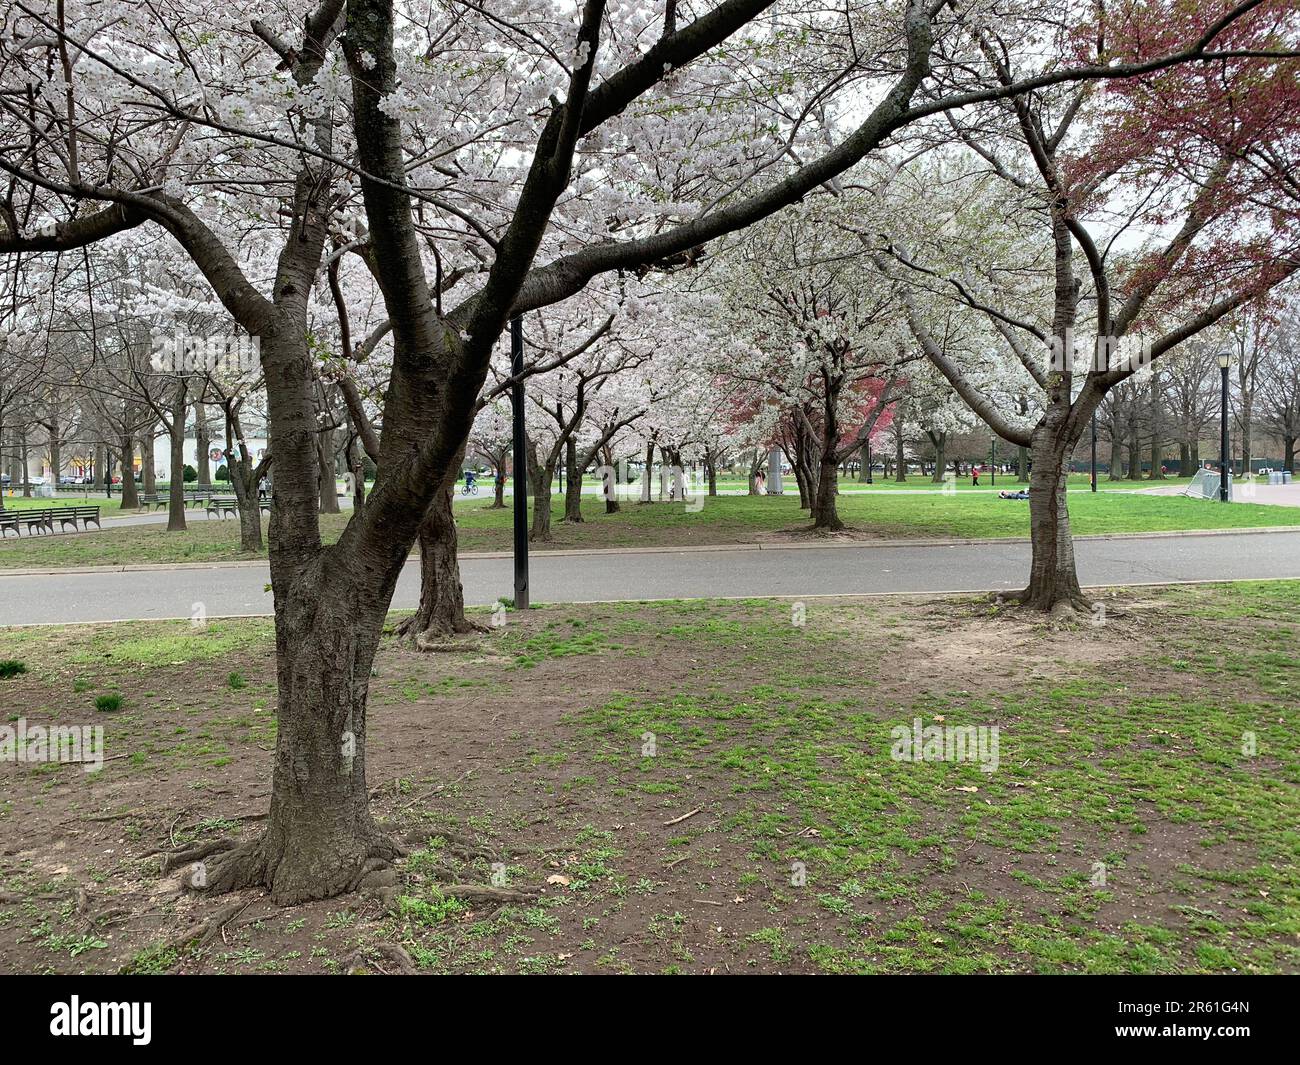 Blooming cherry blossom trees show off their colorful petals in